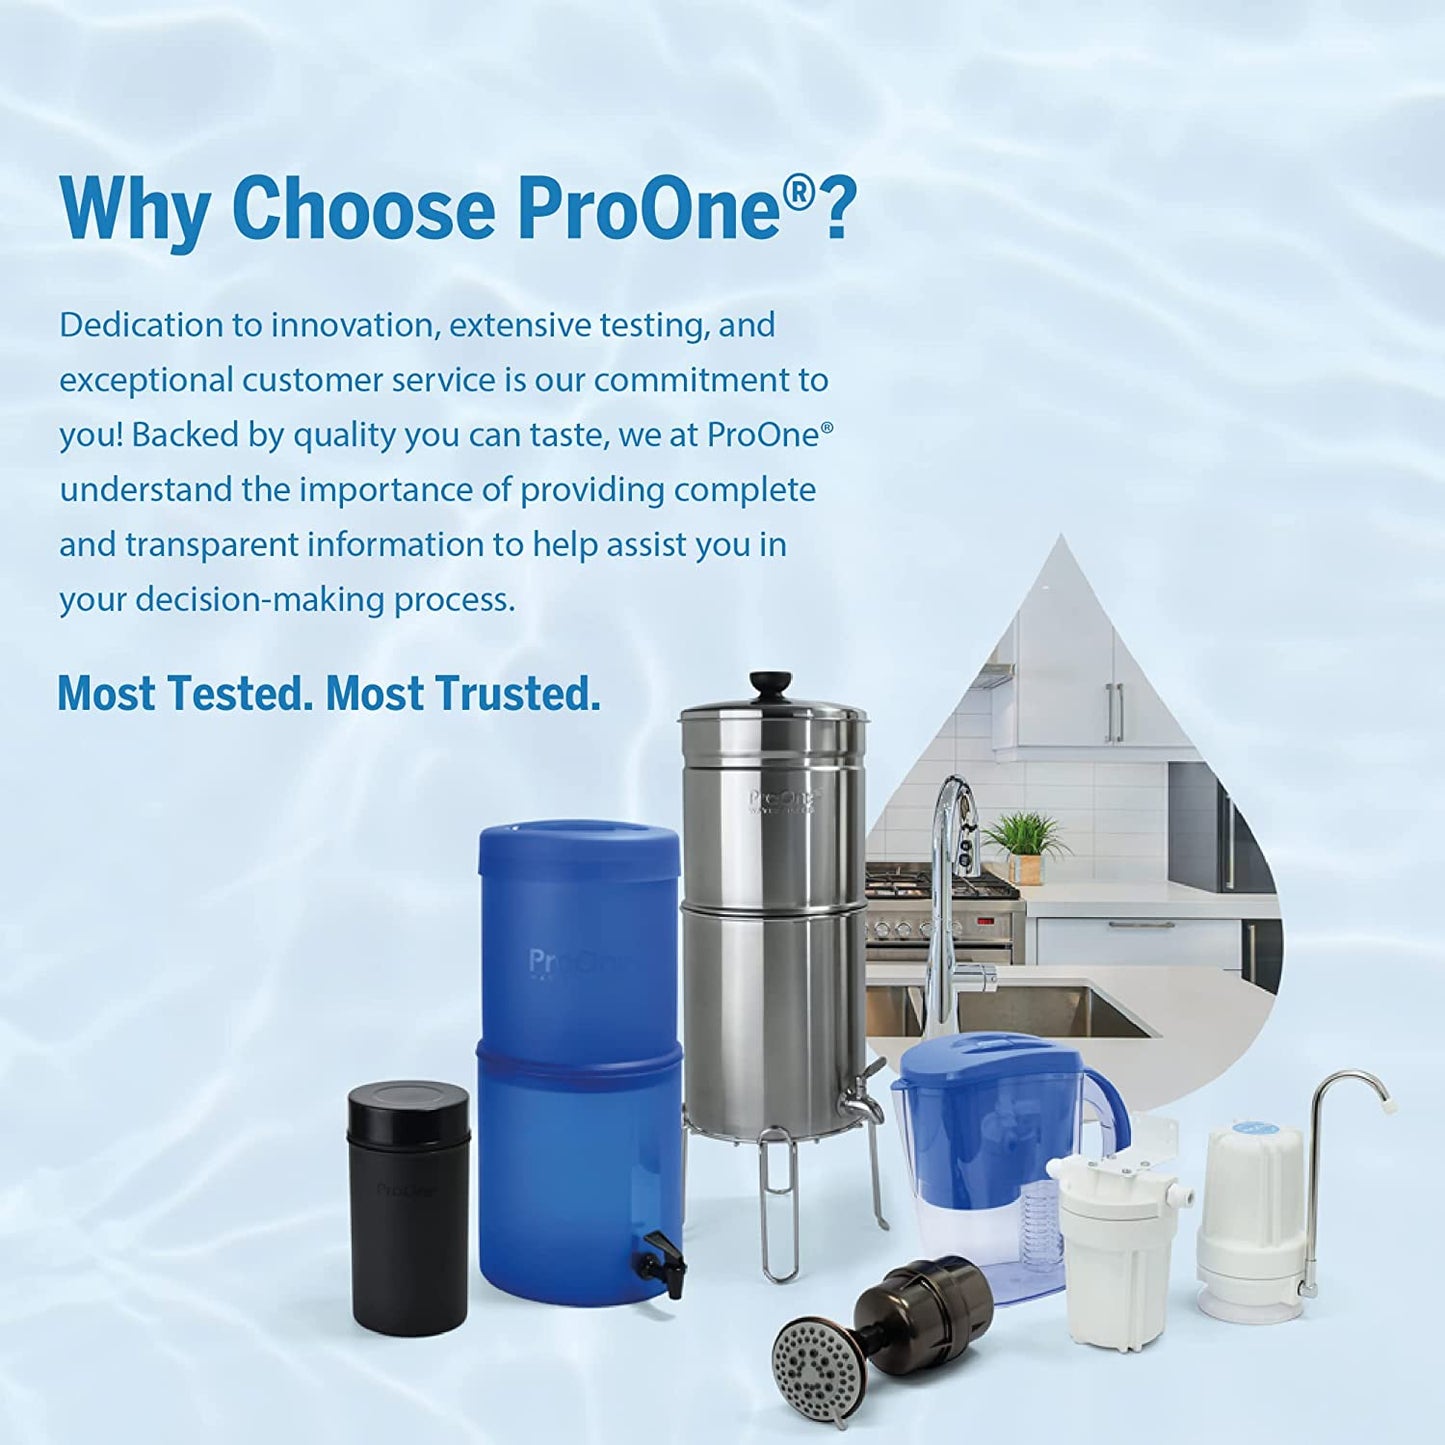 ProOne Big+ Stainless-Steel Gravity Water Filter System, 3-Gallon Water Capacity, Countertop Water Dispenser for Home, Camping, and Travel w/ (2) 7-inch Filter & Wire Stand